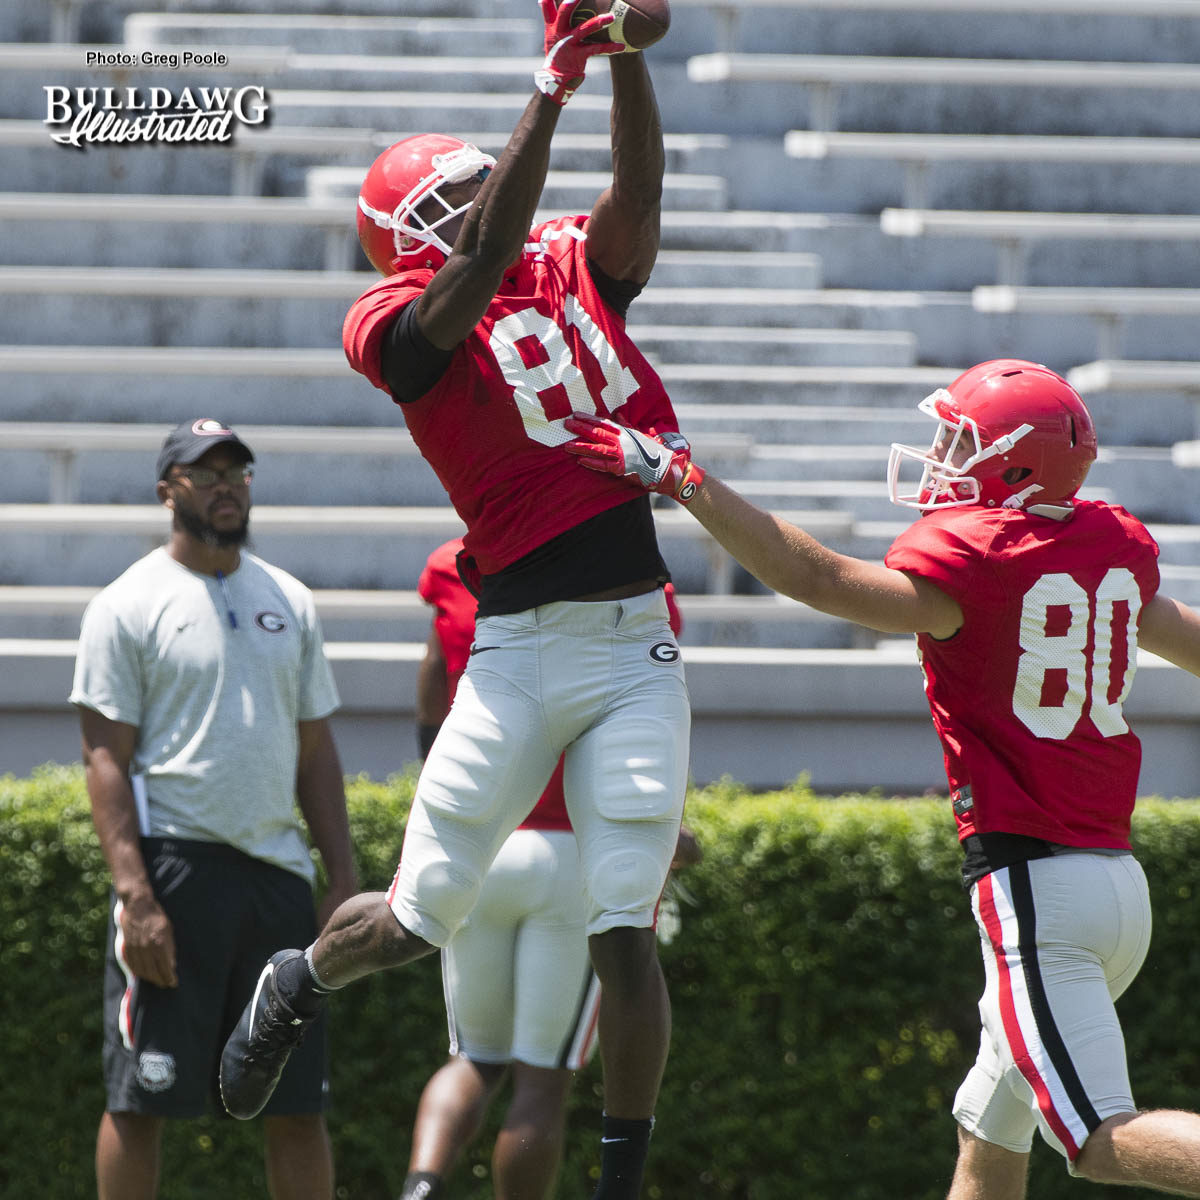 Freshman WR Mark Webb Jr. (81) climbs the ladder to make the catch over WR J.T. Dooley (80) - Georgia's 1st scrimmage of Fall Camp - Saturday, August 12, 2017